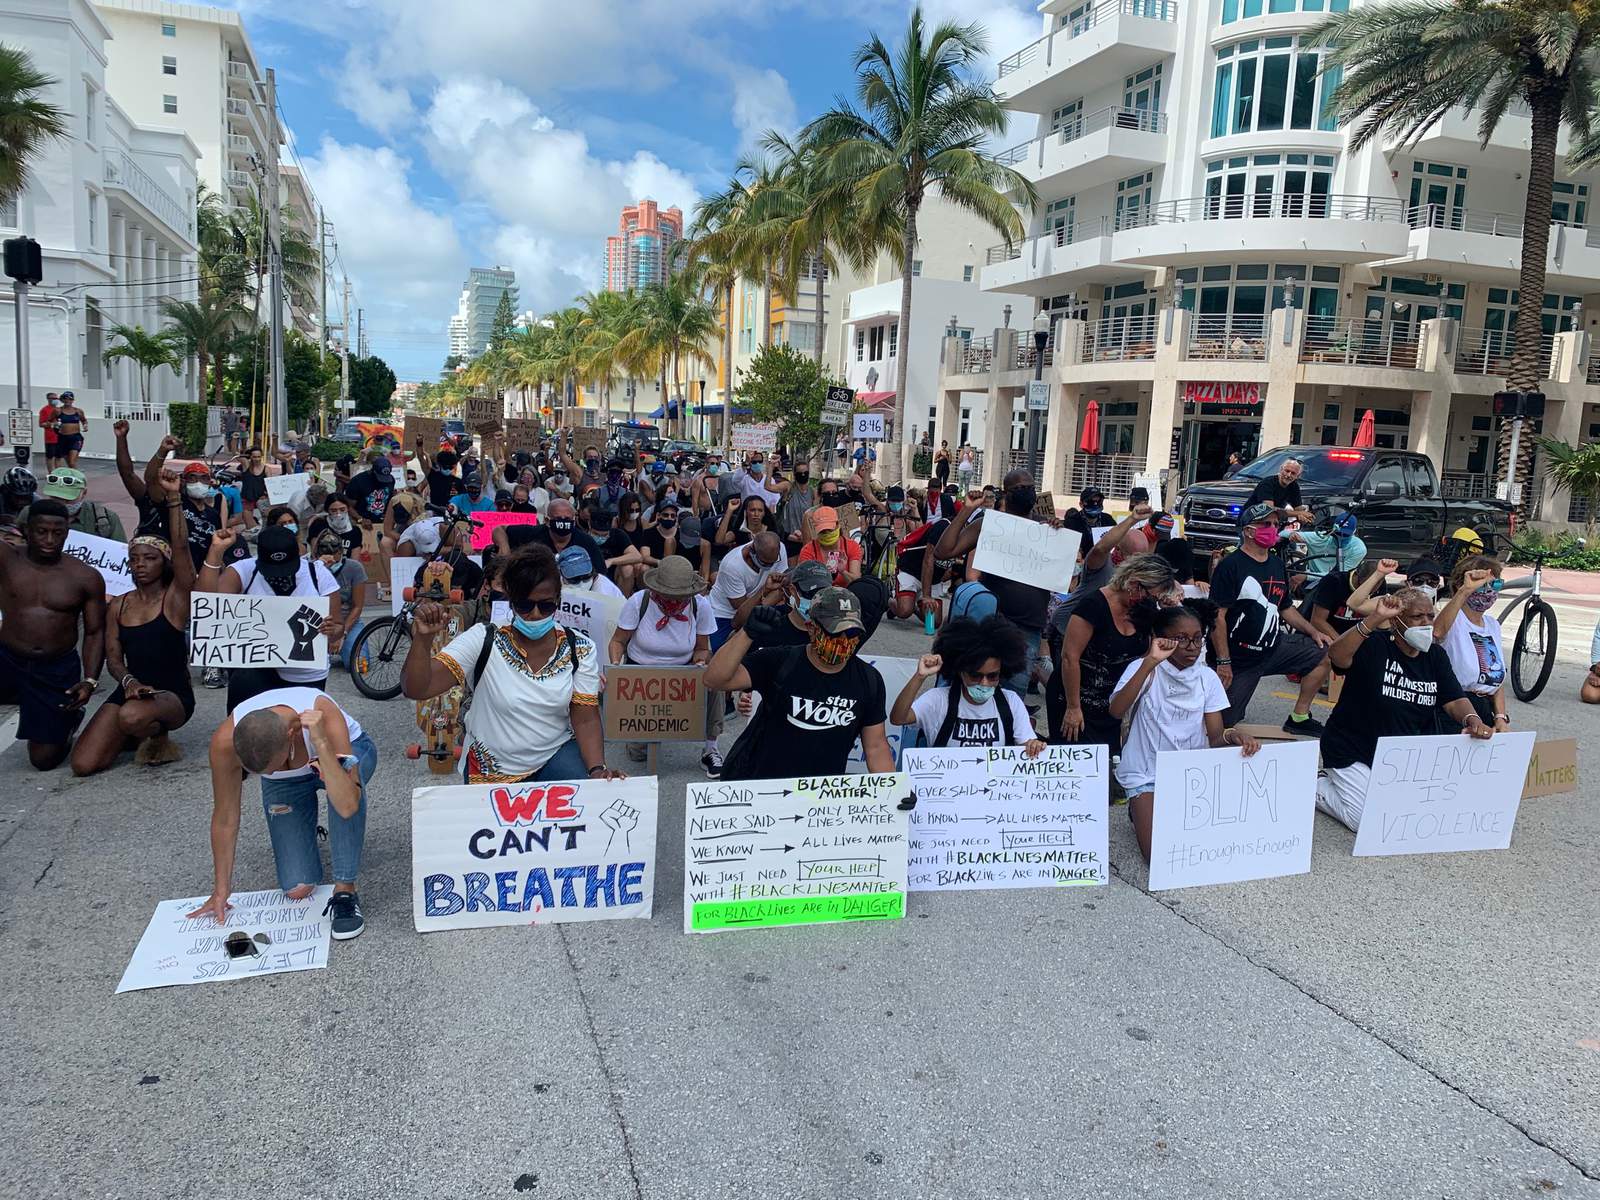 Mother of Trayvon Martin joins Miami protesters seeking racial justice, police support